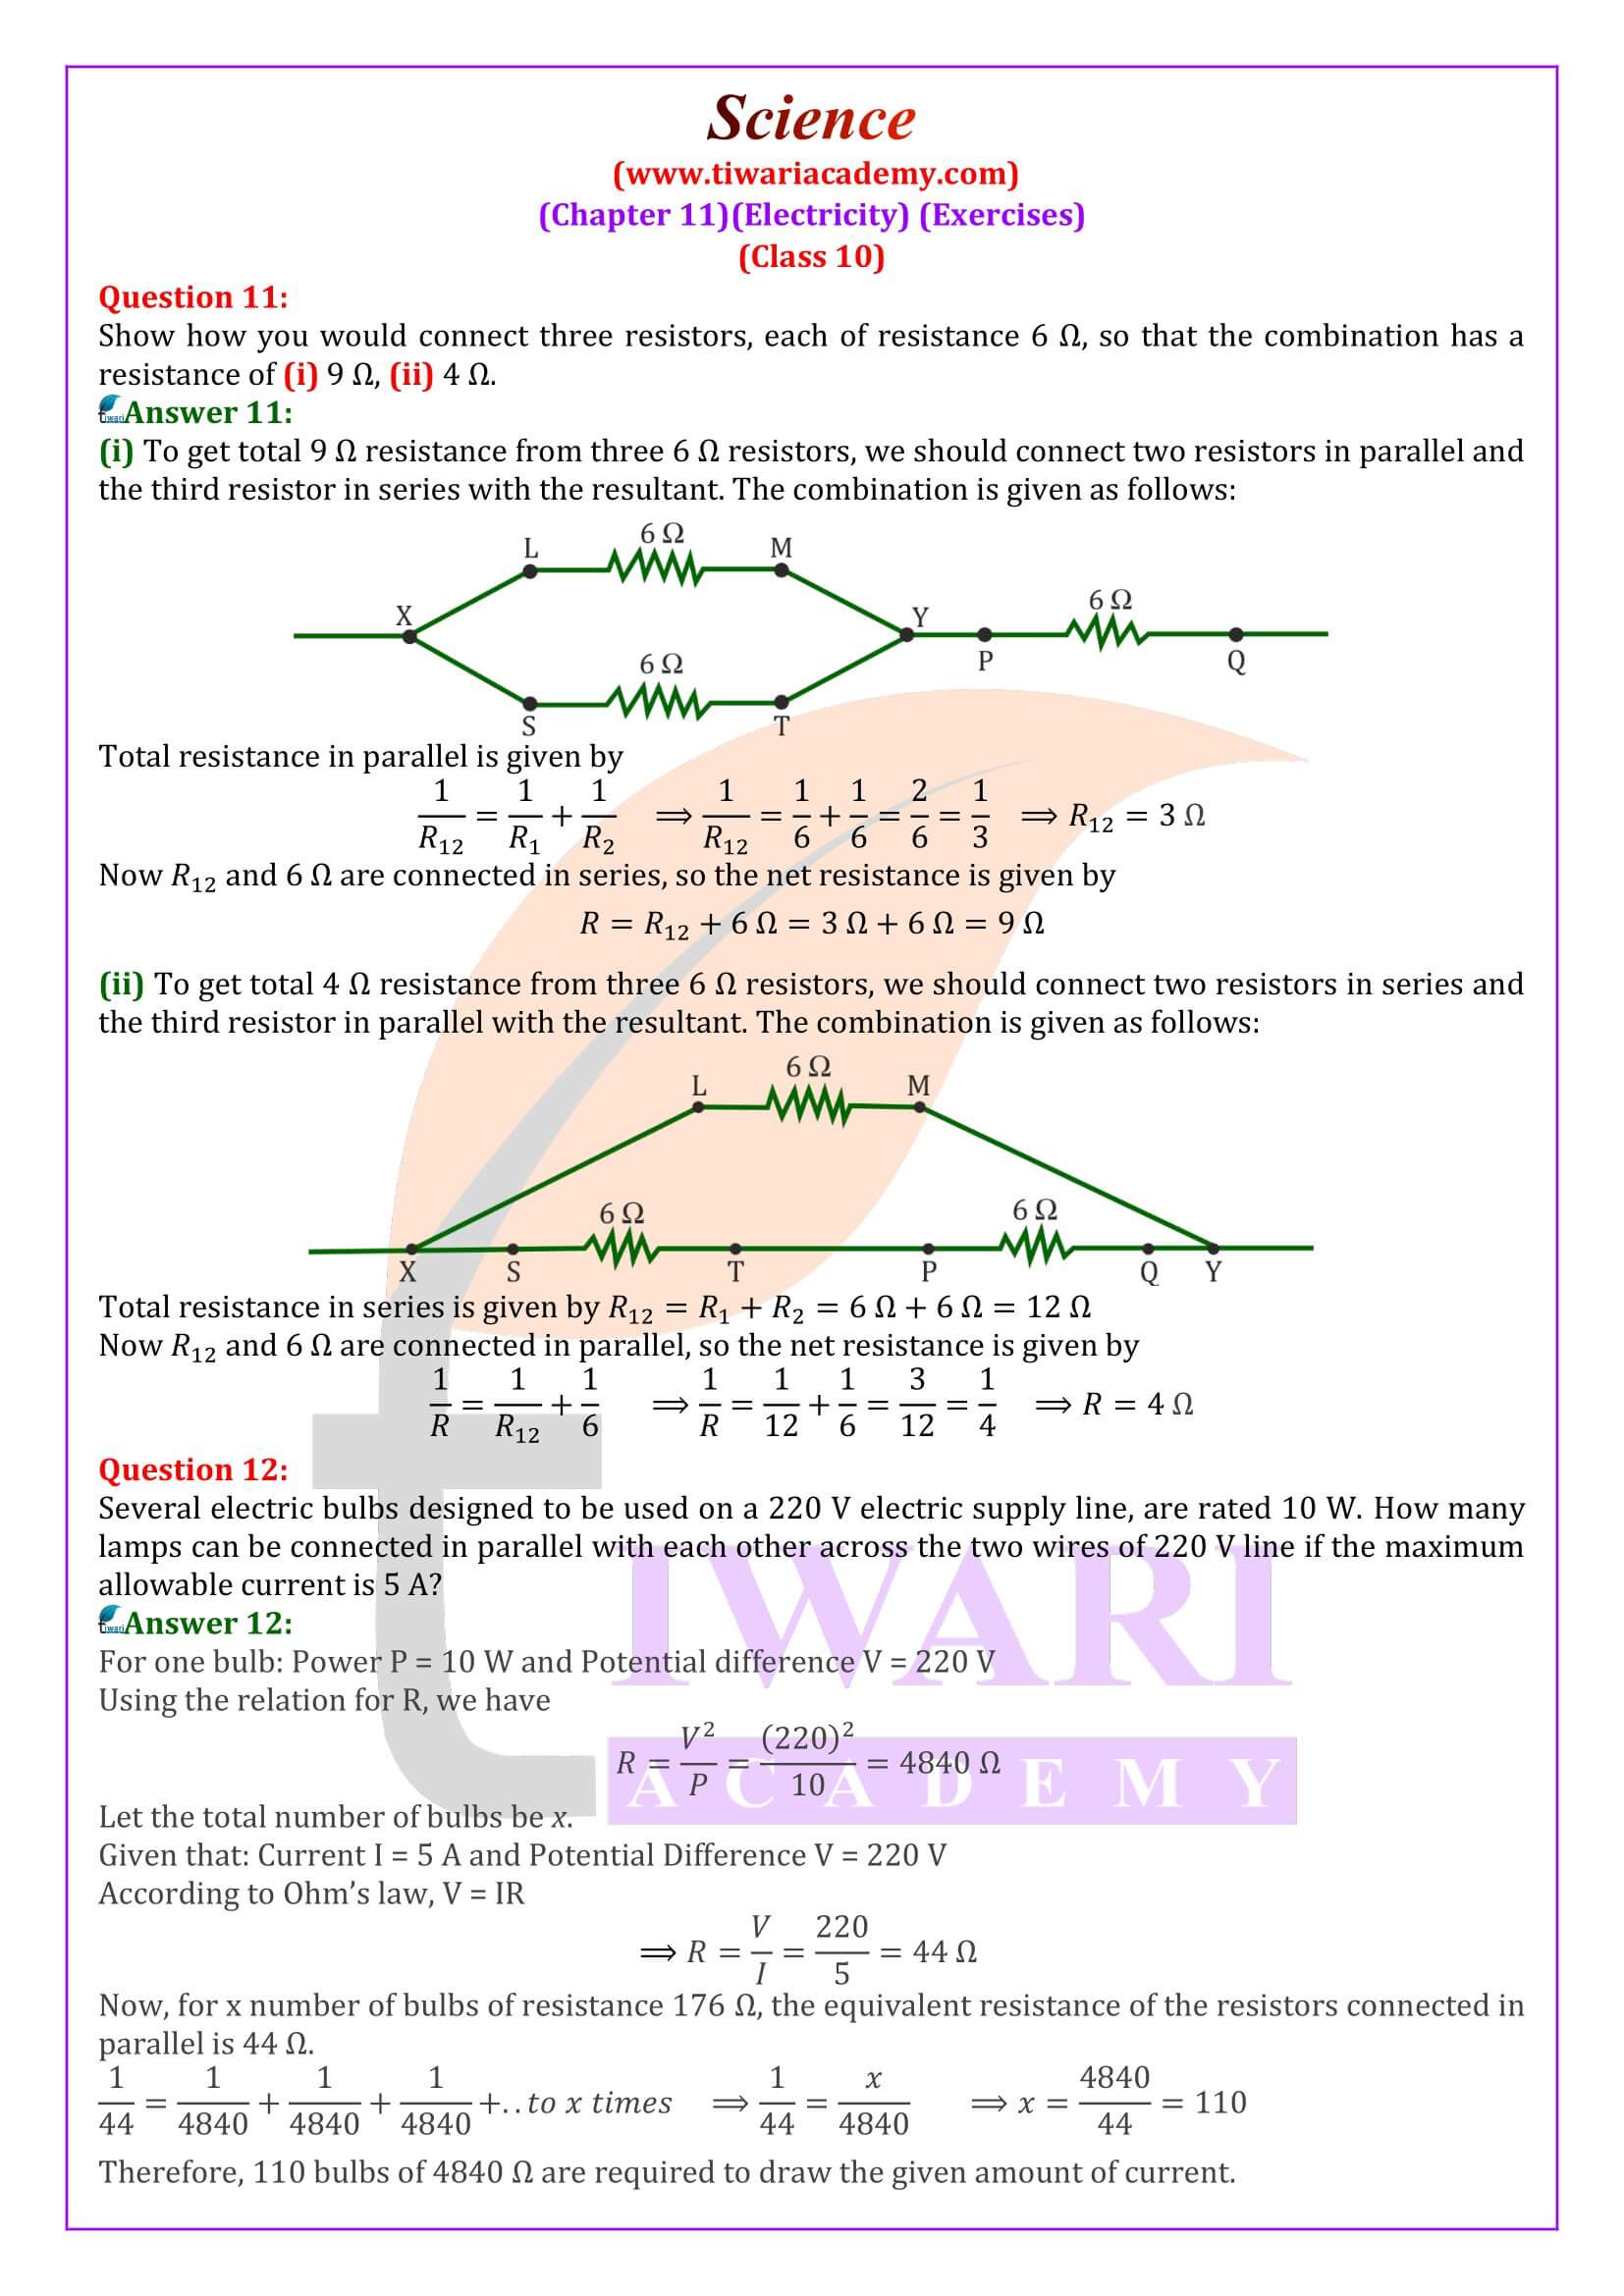 NCERT Solutions for Class 10 Science Chapter 11 in English Medium